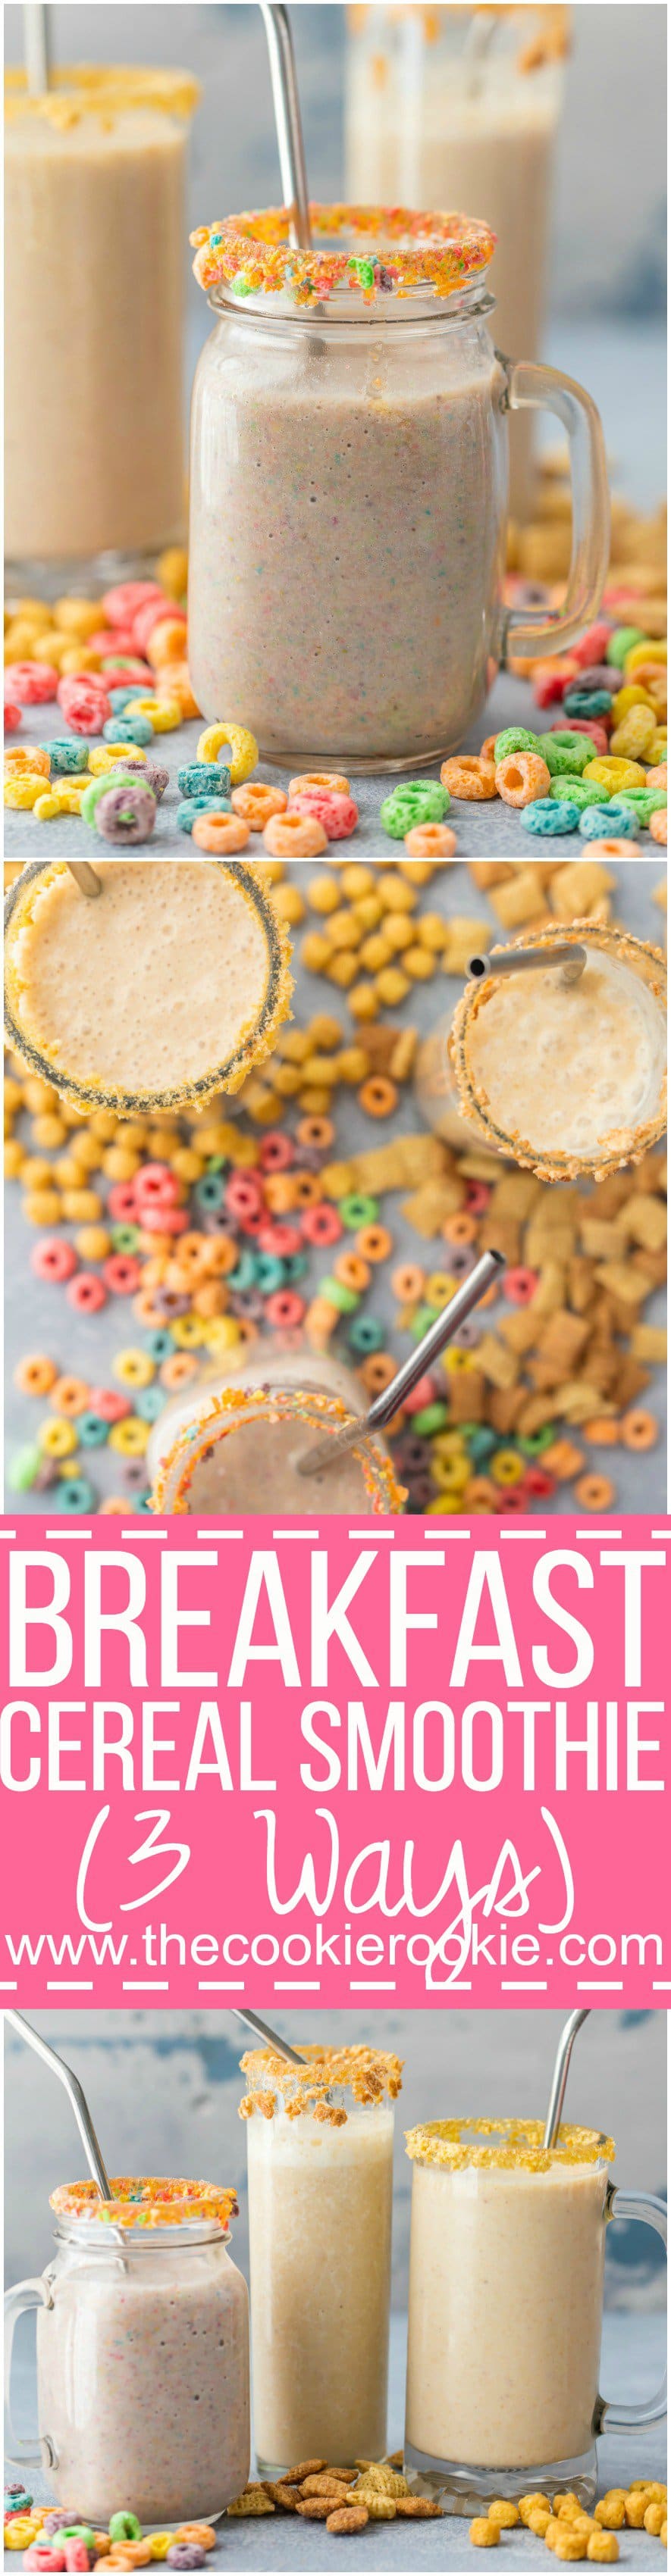 Breakfast Cereal Smoothie (3 Ways!) is a fun, healthy, and easy breakfast the entire family with love! Blend your favorite cereal with milk, bananas, and ice and you're in business! Customizable for any flavor. SO FUN!